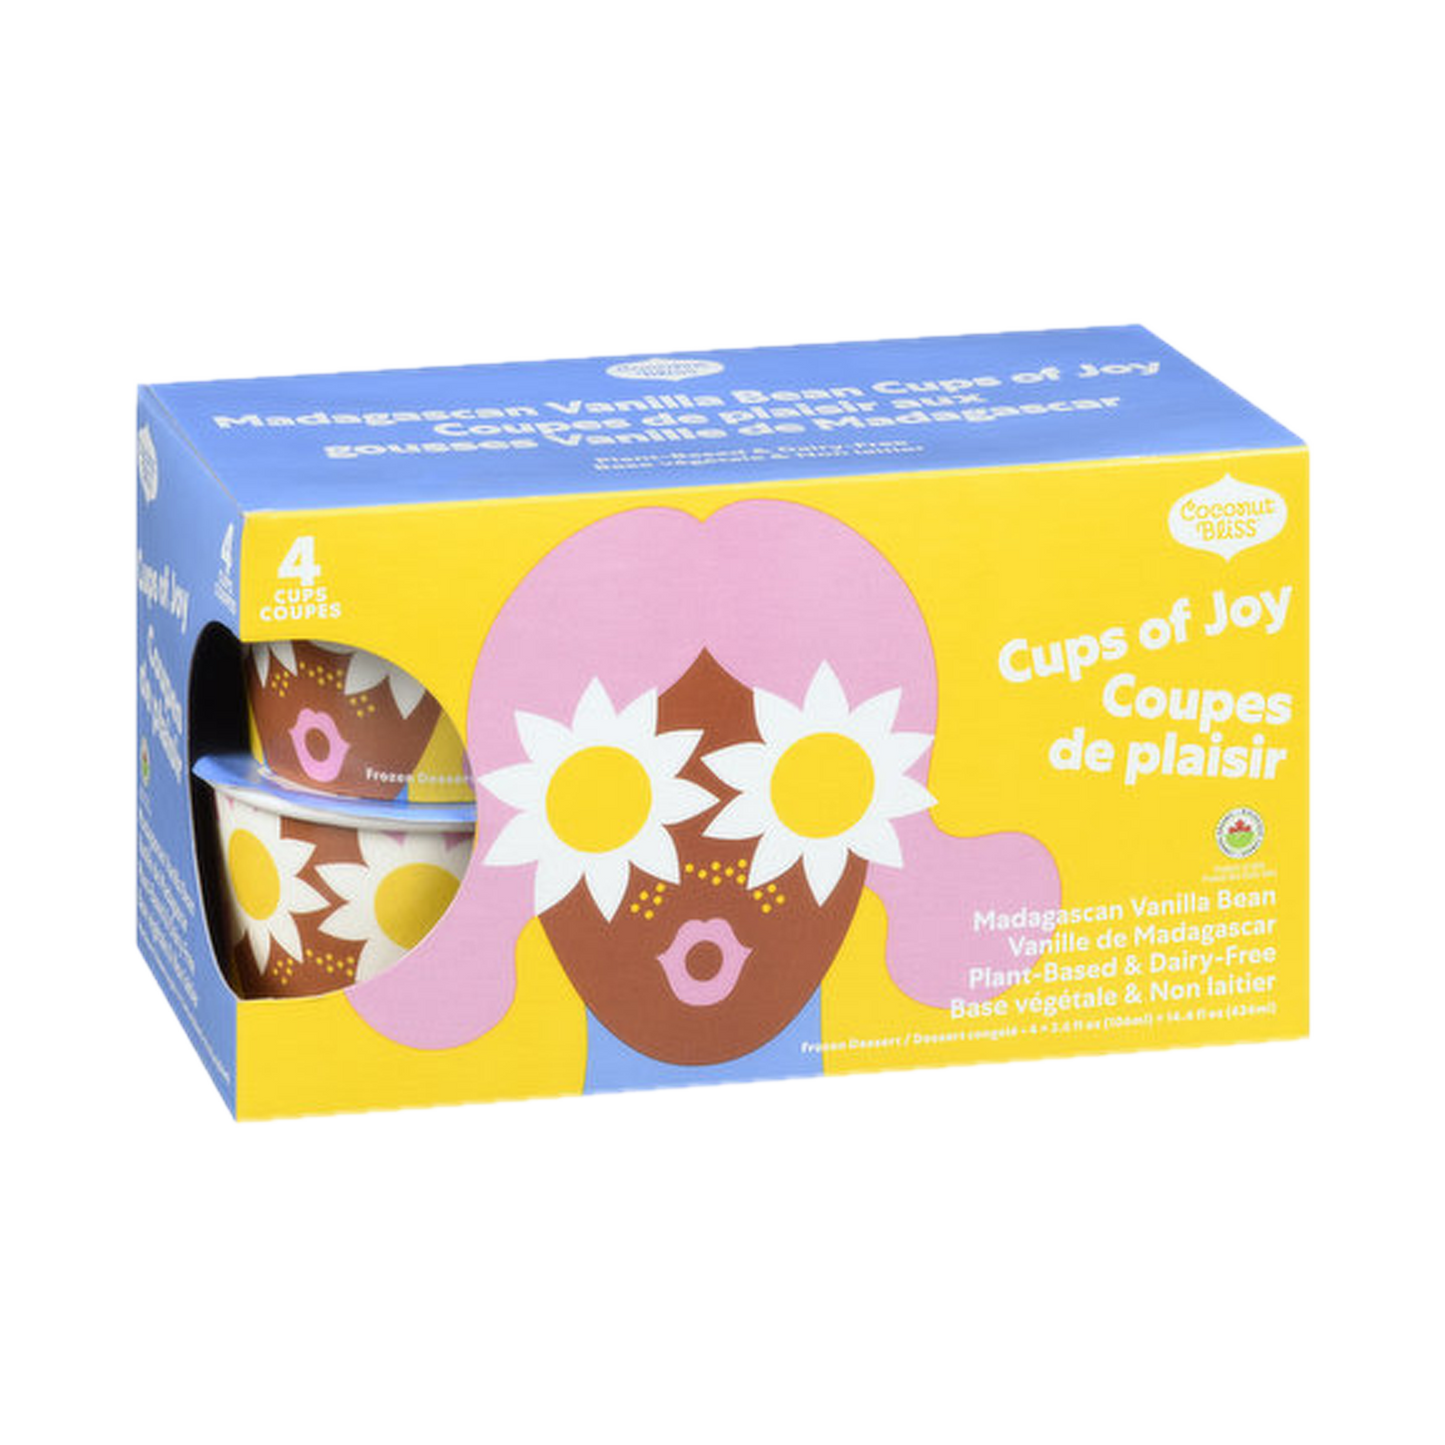 Coconut Bliss - Cups Of Joy - Vanilla Bean (4 cups) - Store Pick-Up Only